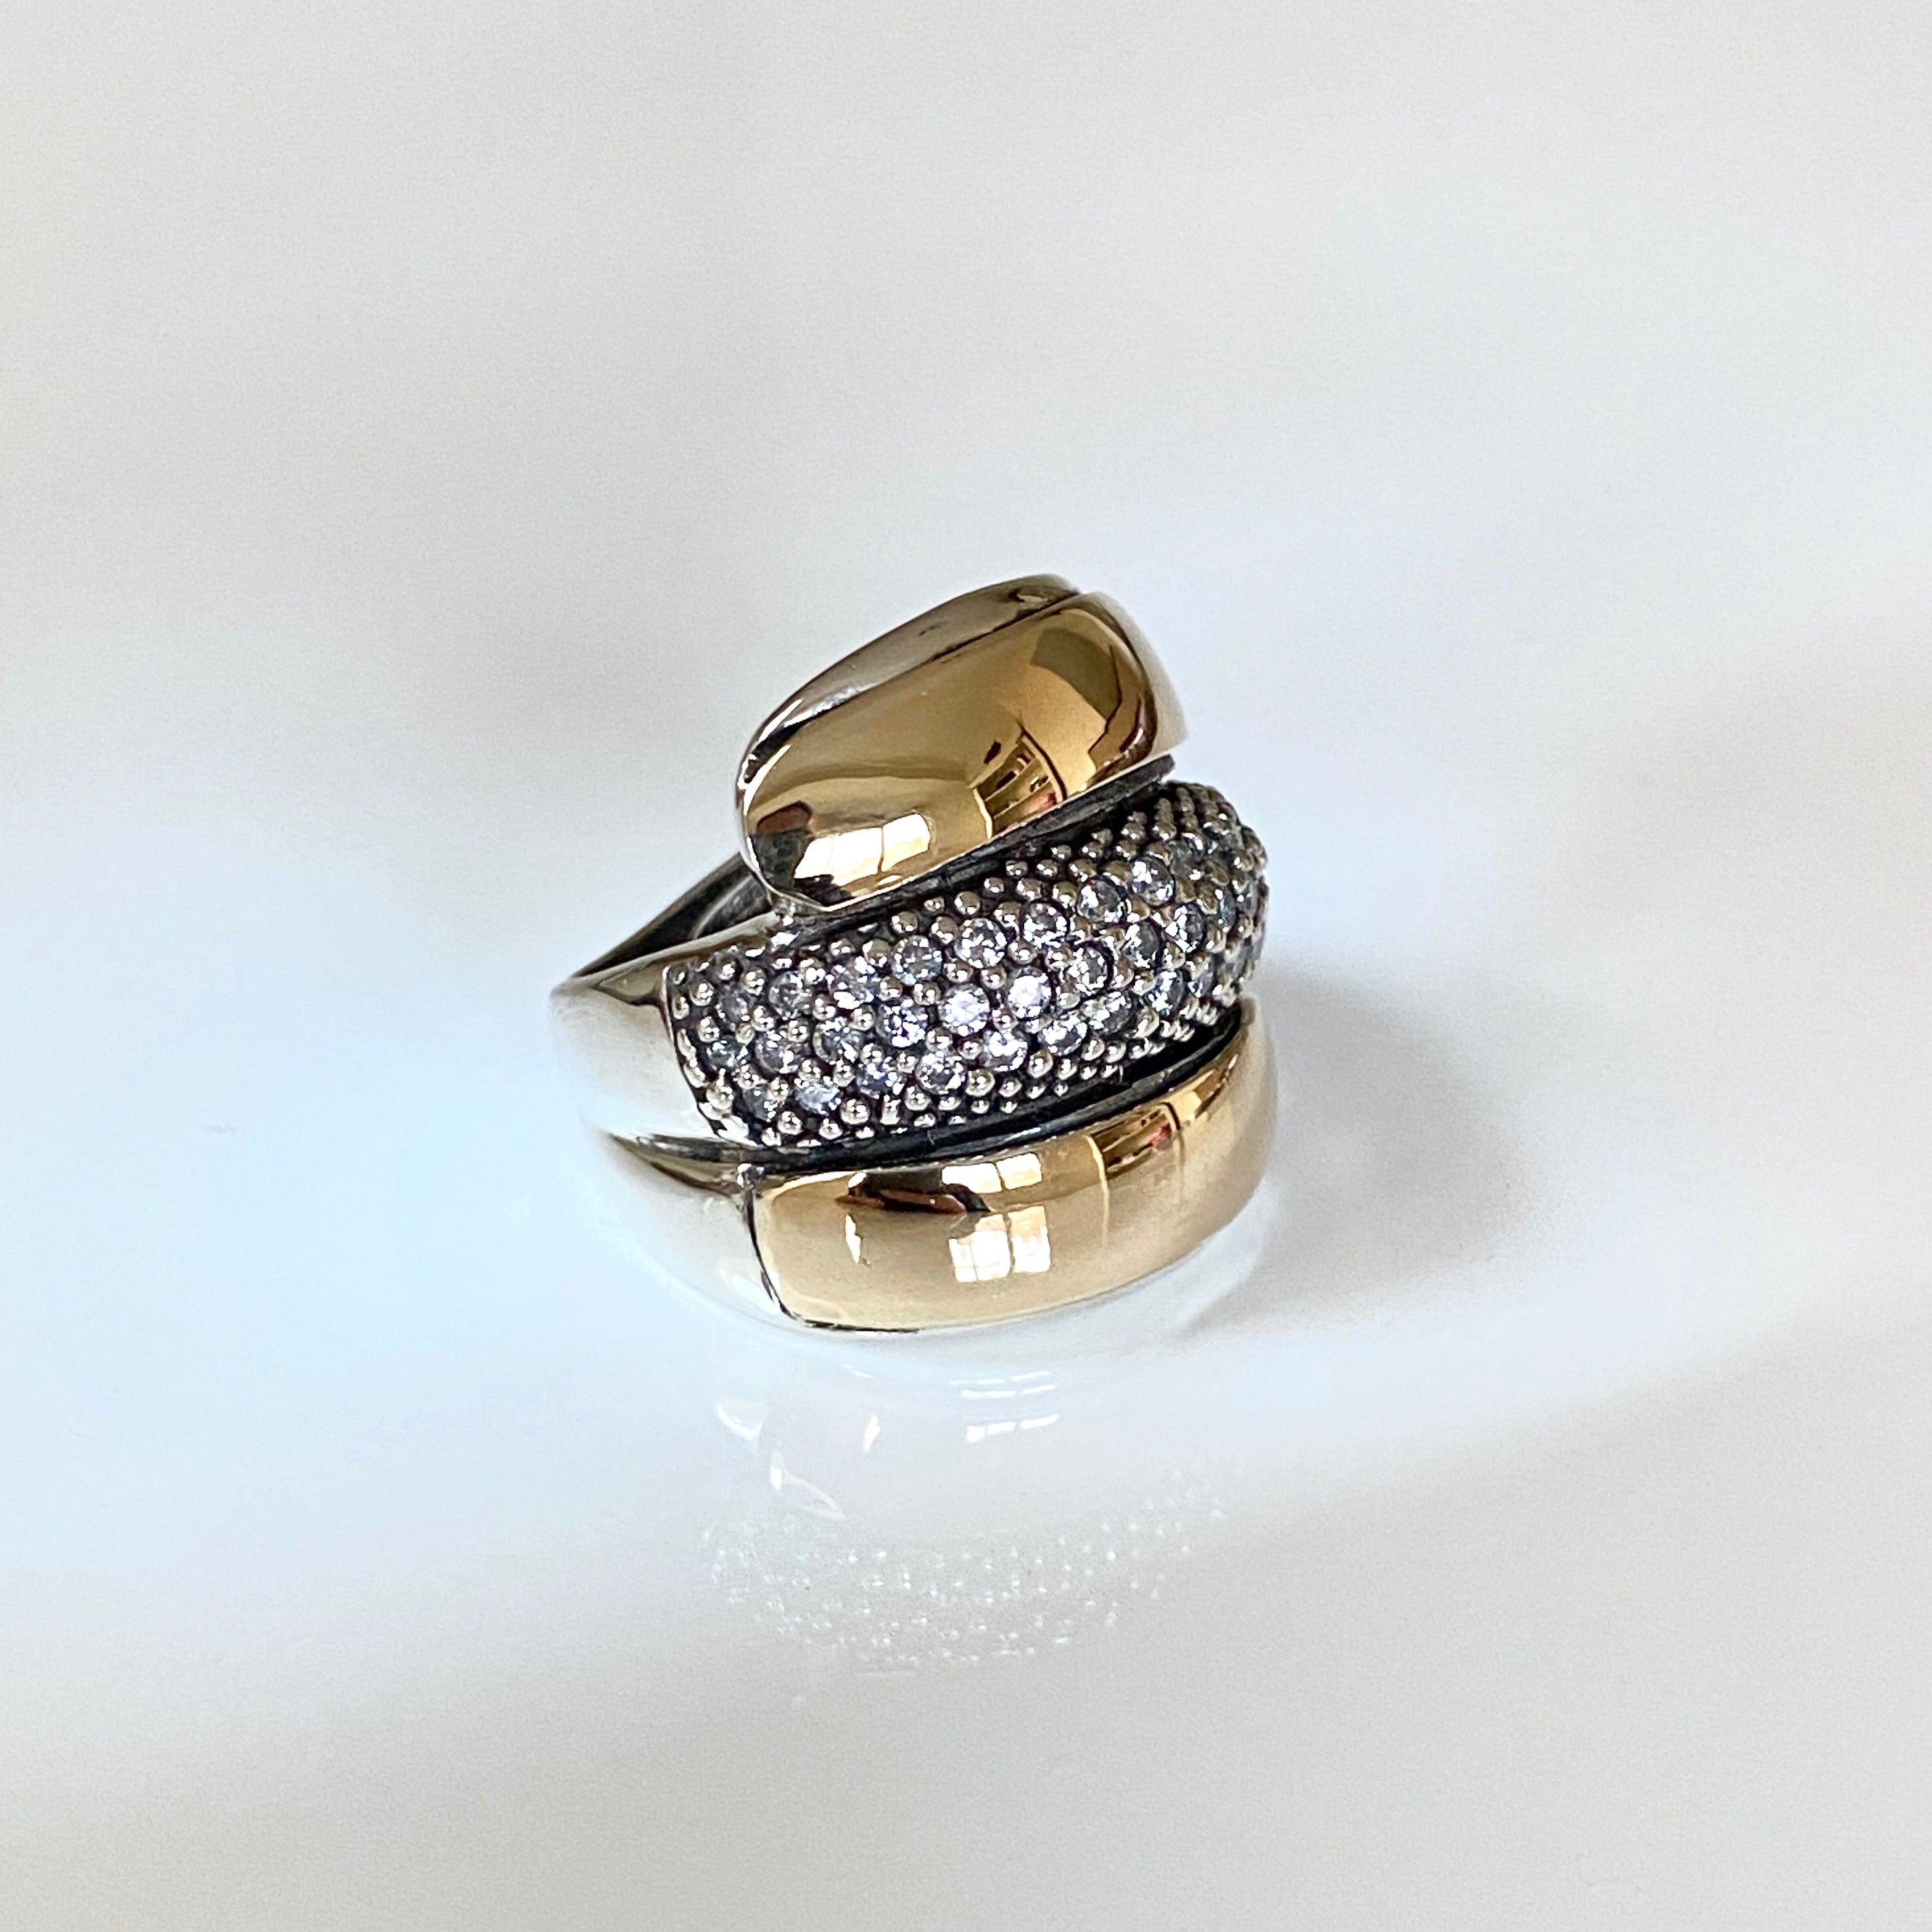 MONTE CARLO RING - Sterling Silver and 14k Yellow Gold-Tayroni